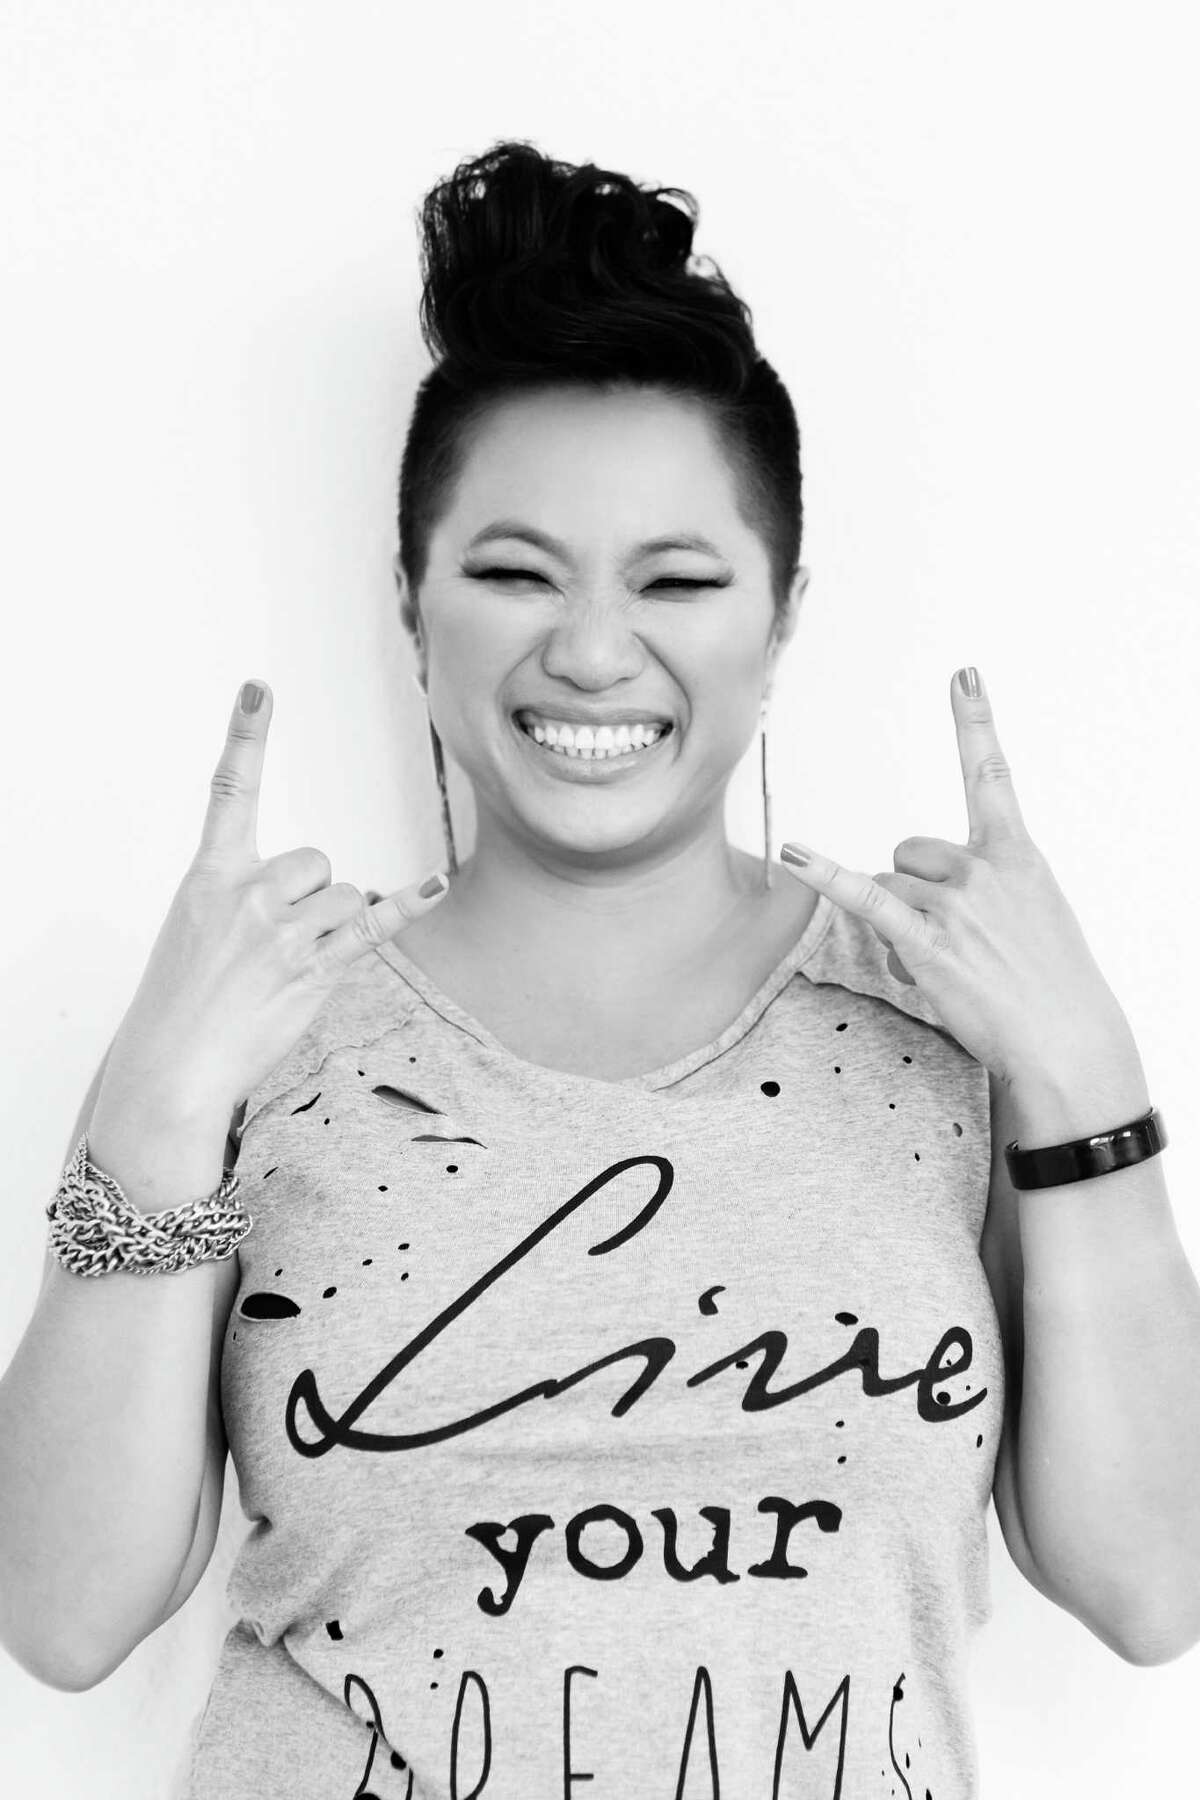 STYLE PROFILE: Sydney Dao, owner of Squid Inc. PR and sister to Project Runway winner and Houston fashion designer Chloe Dao. Her "Live Your Dreams" Tshirt is from Nordstrom. Hair by Christine Thai and makeup by Aubrie Layne.